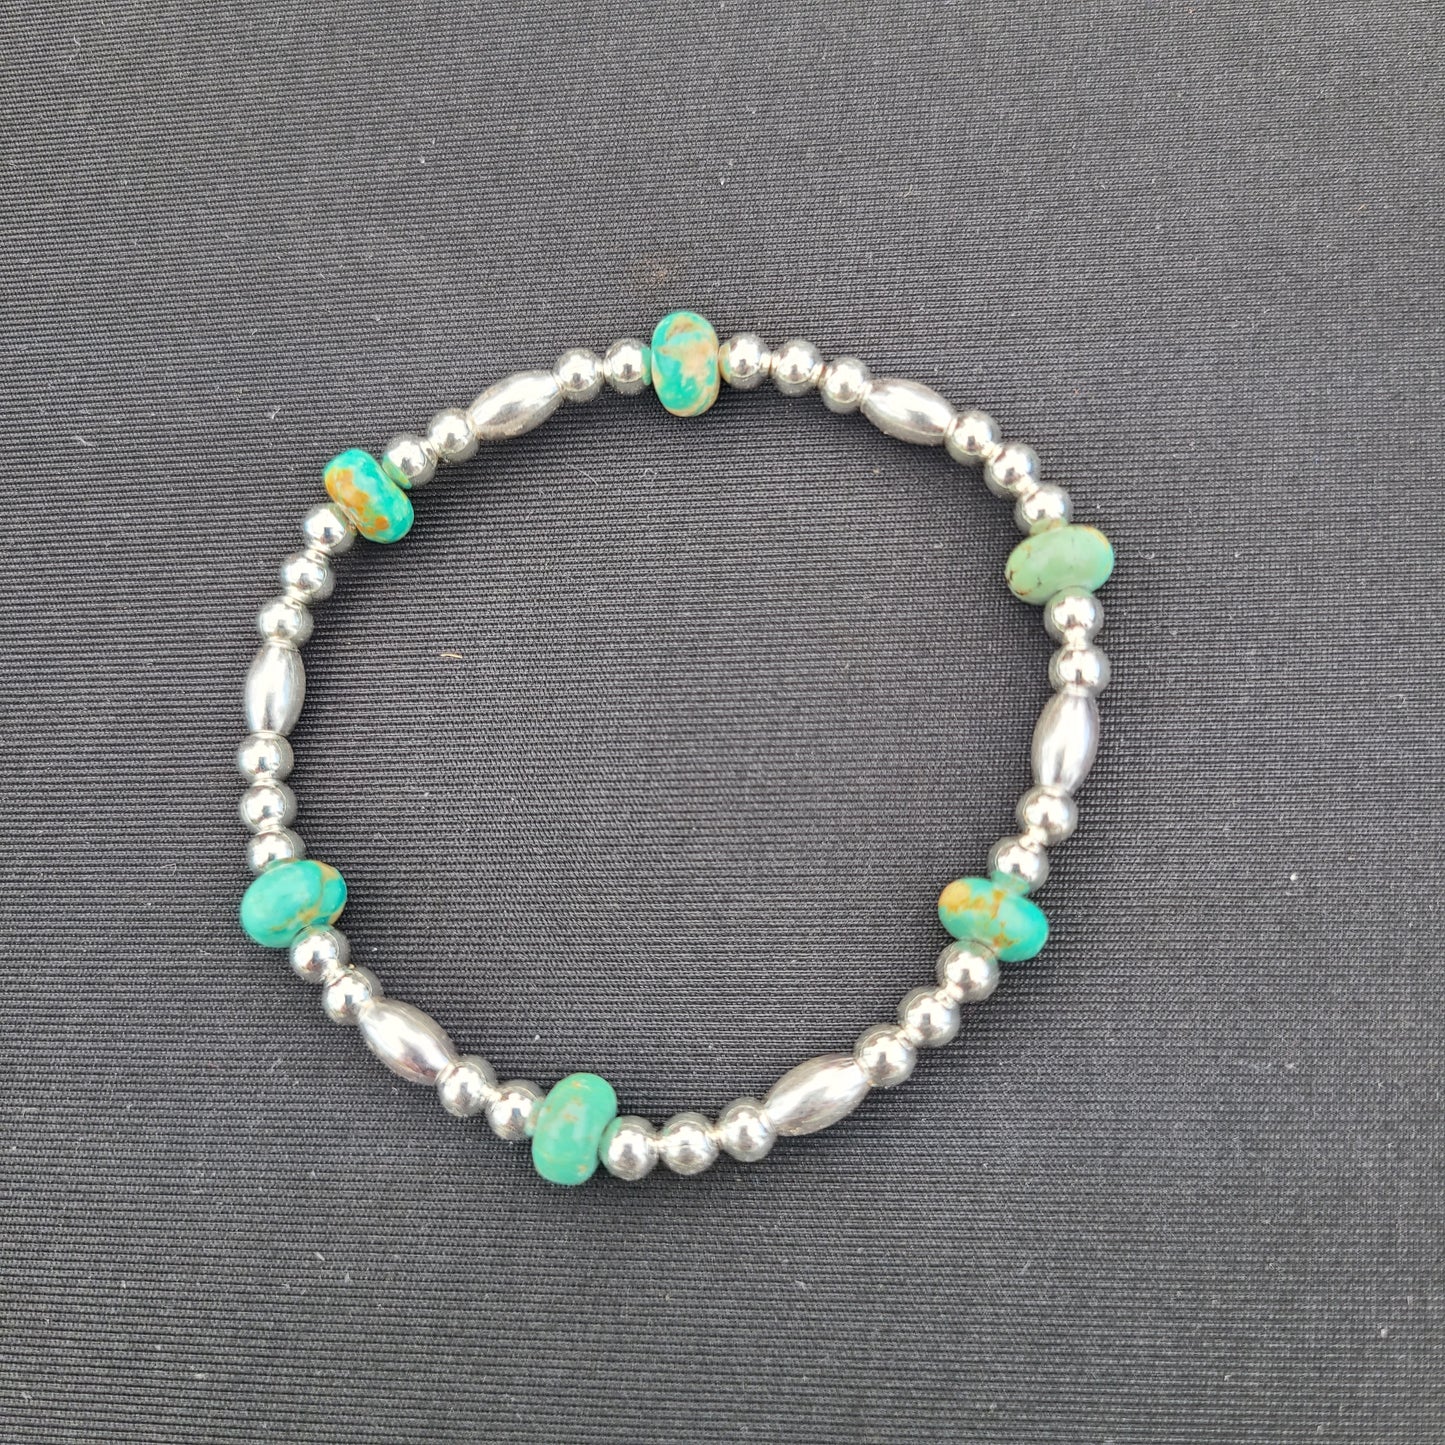 Turquoise and Sterling Silver Stacker Bracelet